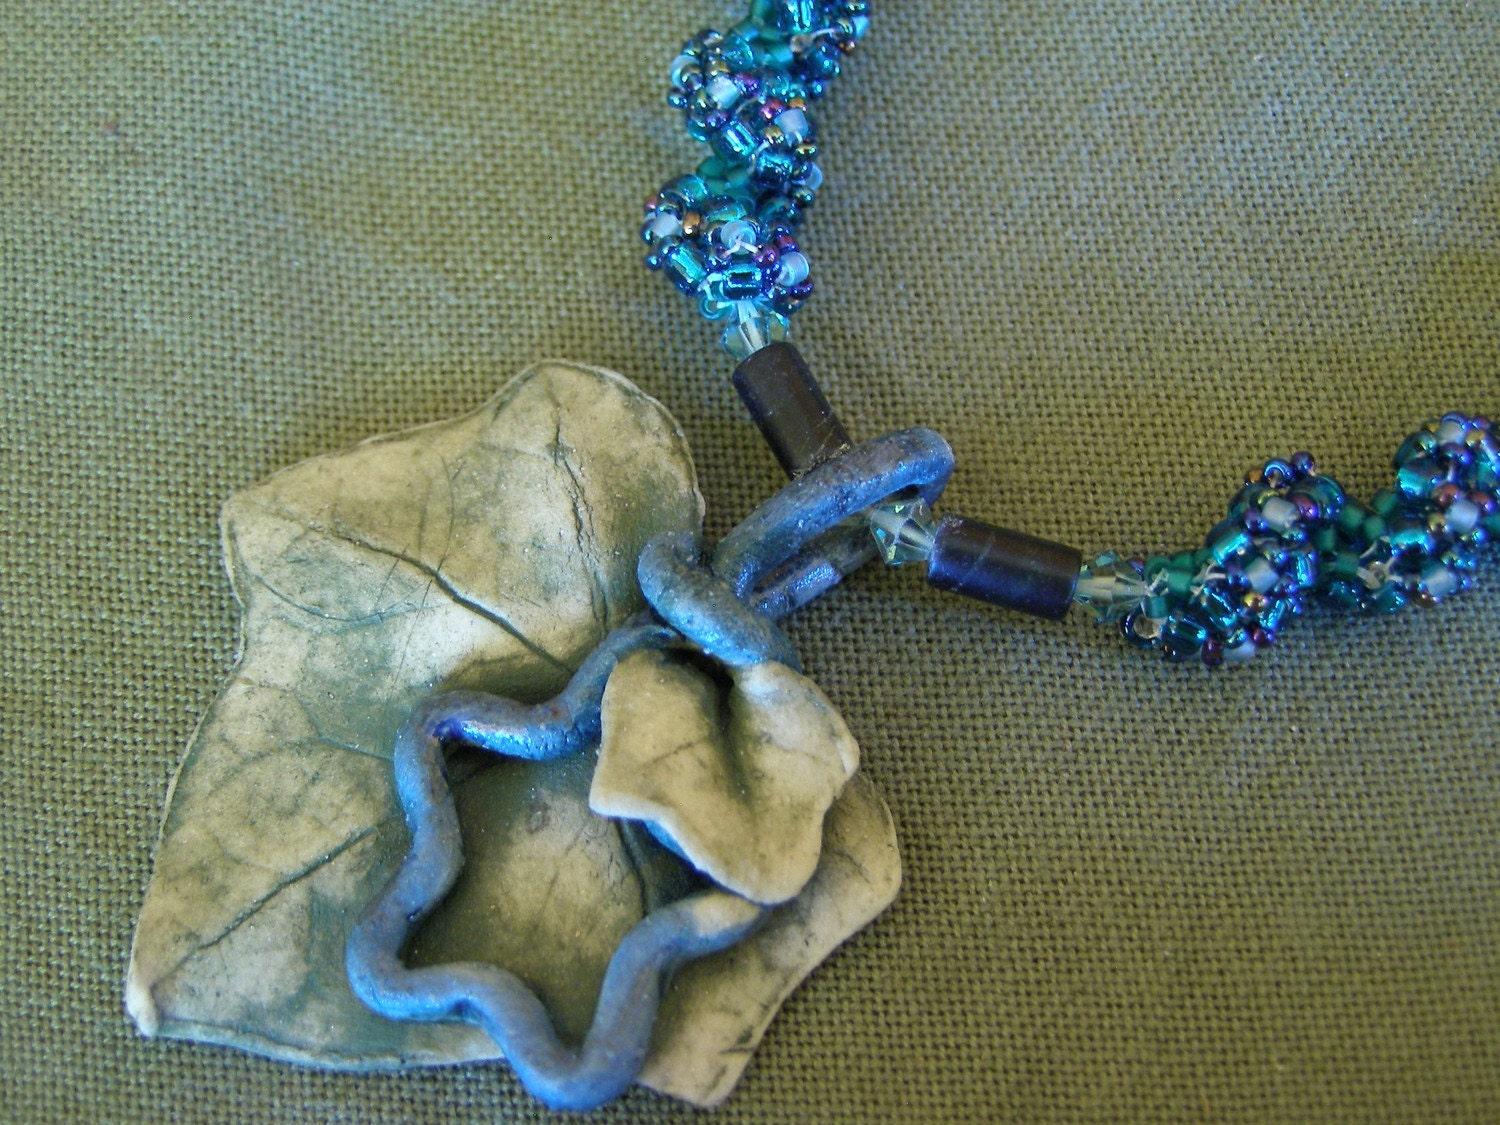 The Ivy Shines Upon a Starry Night - An OOAK Stitched Necklace Created by Jarita